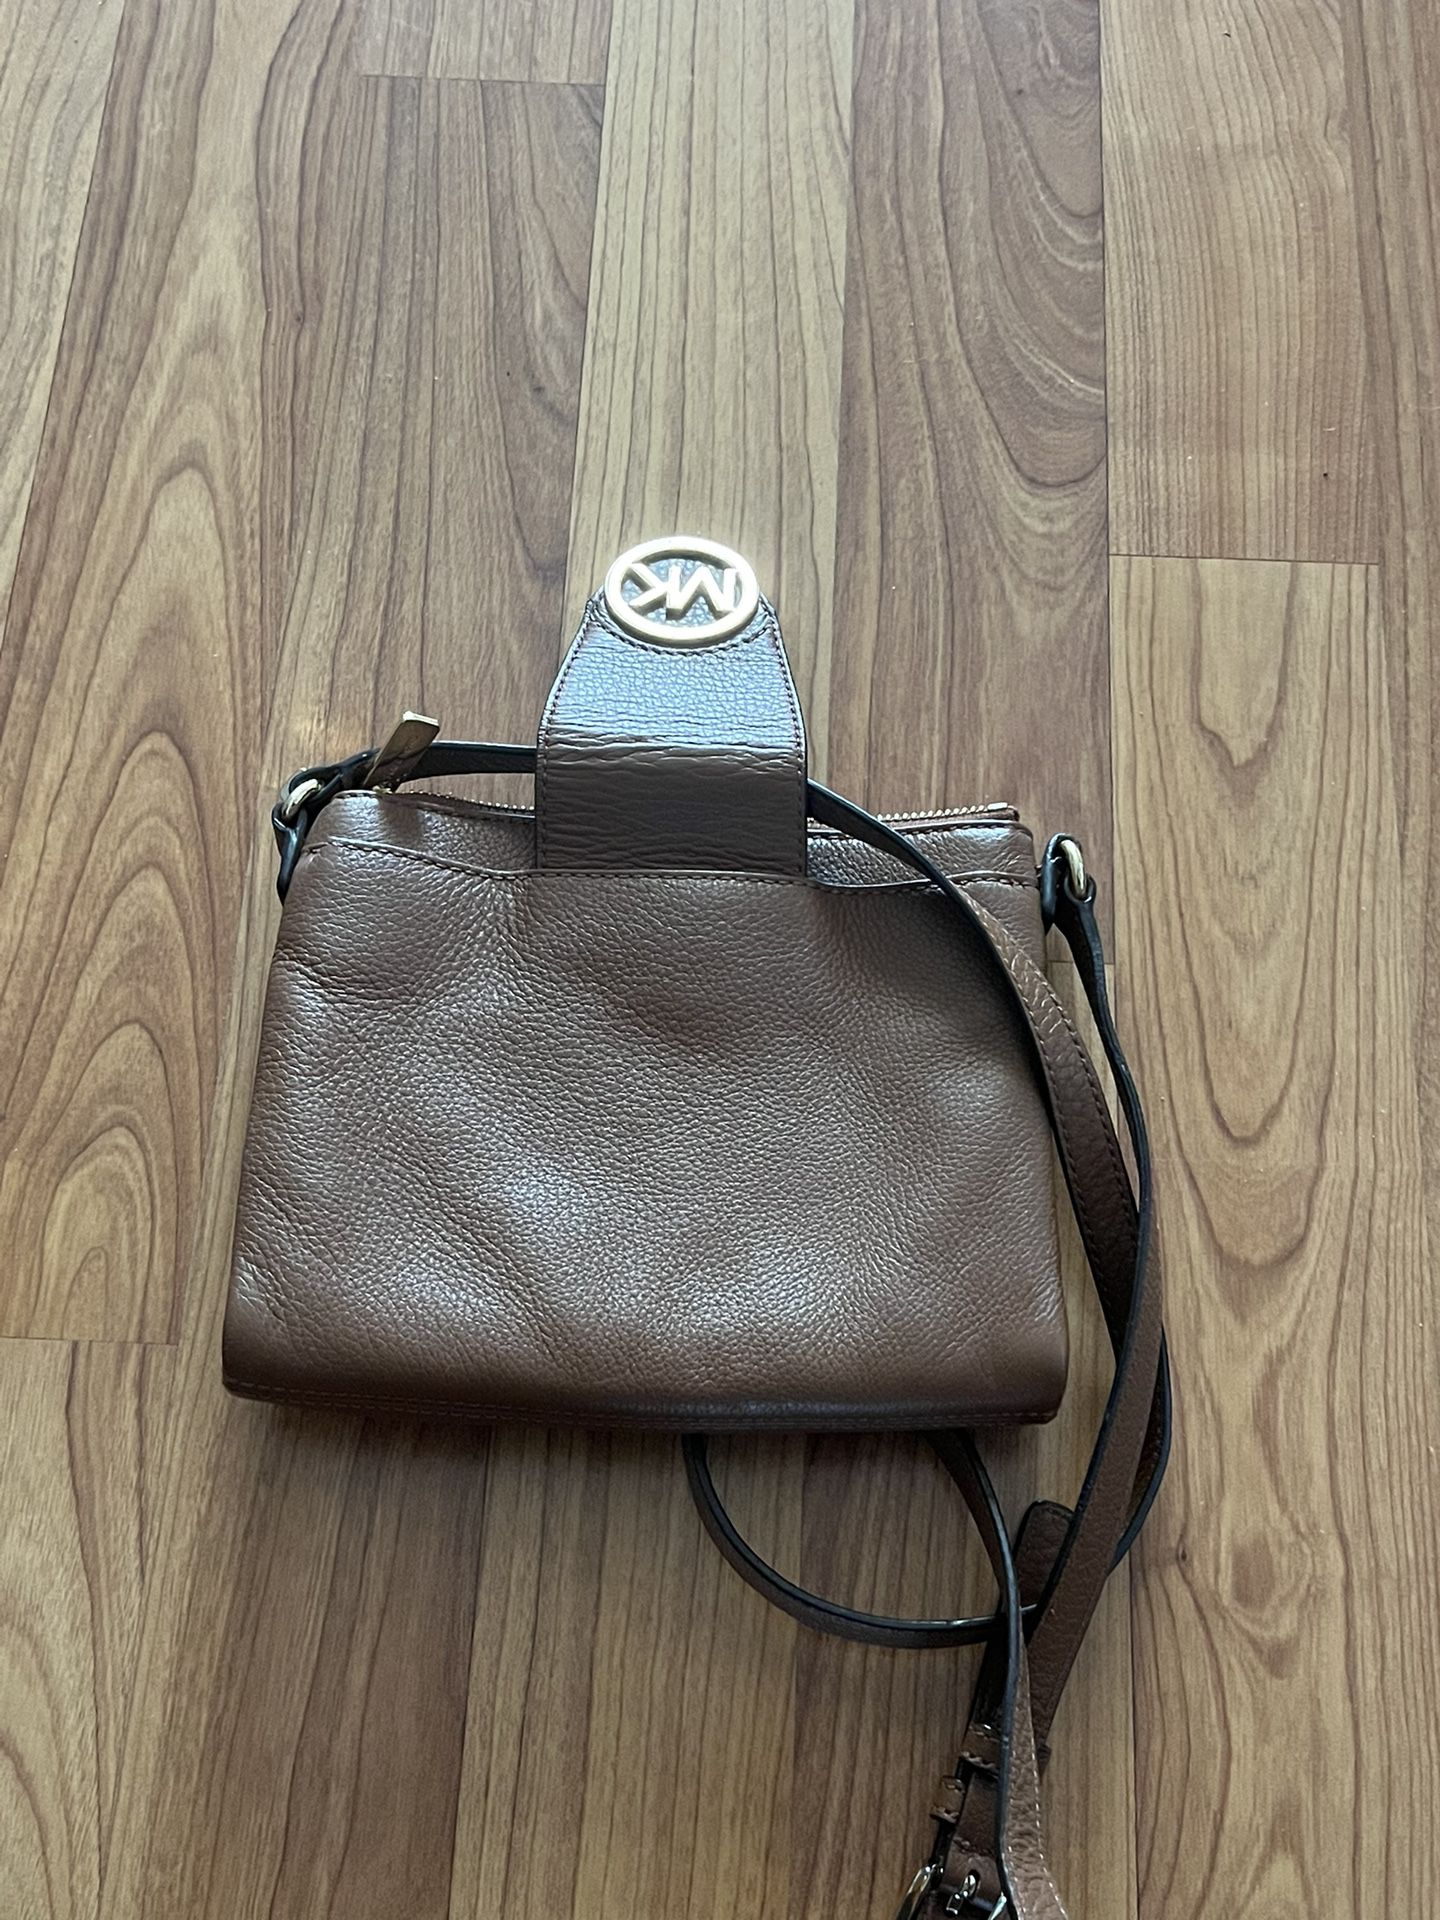 Michael Kors Rayne Sunshine Small Crossbody Leather- Yellow for Sale in  Miami, FL - OfferUp